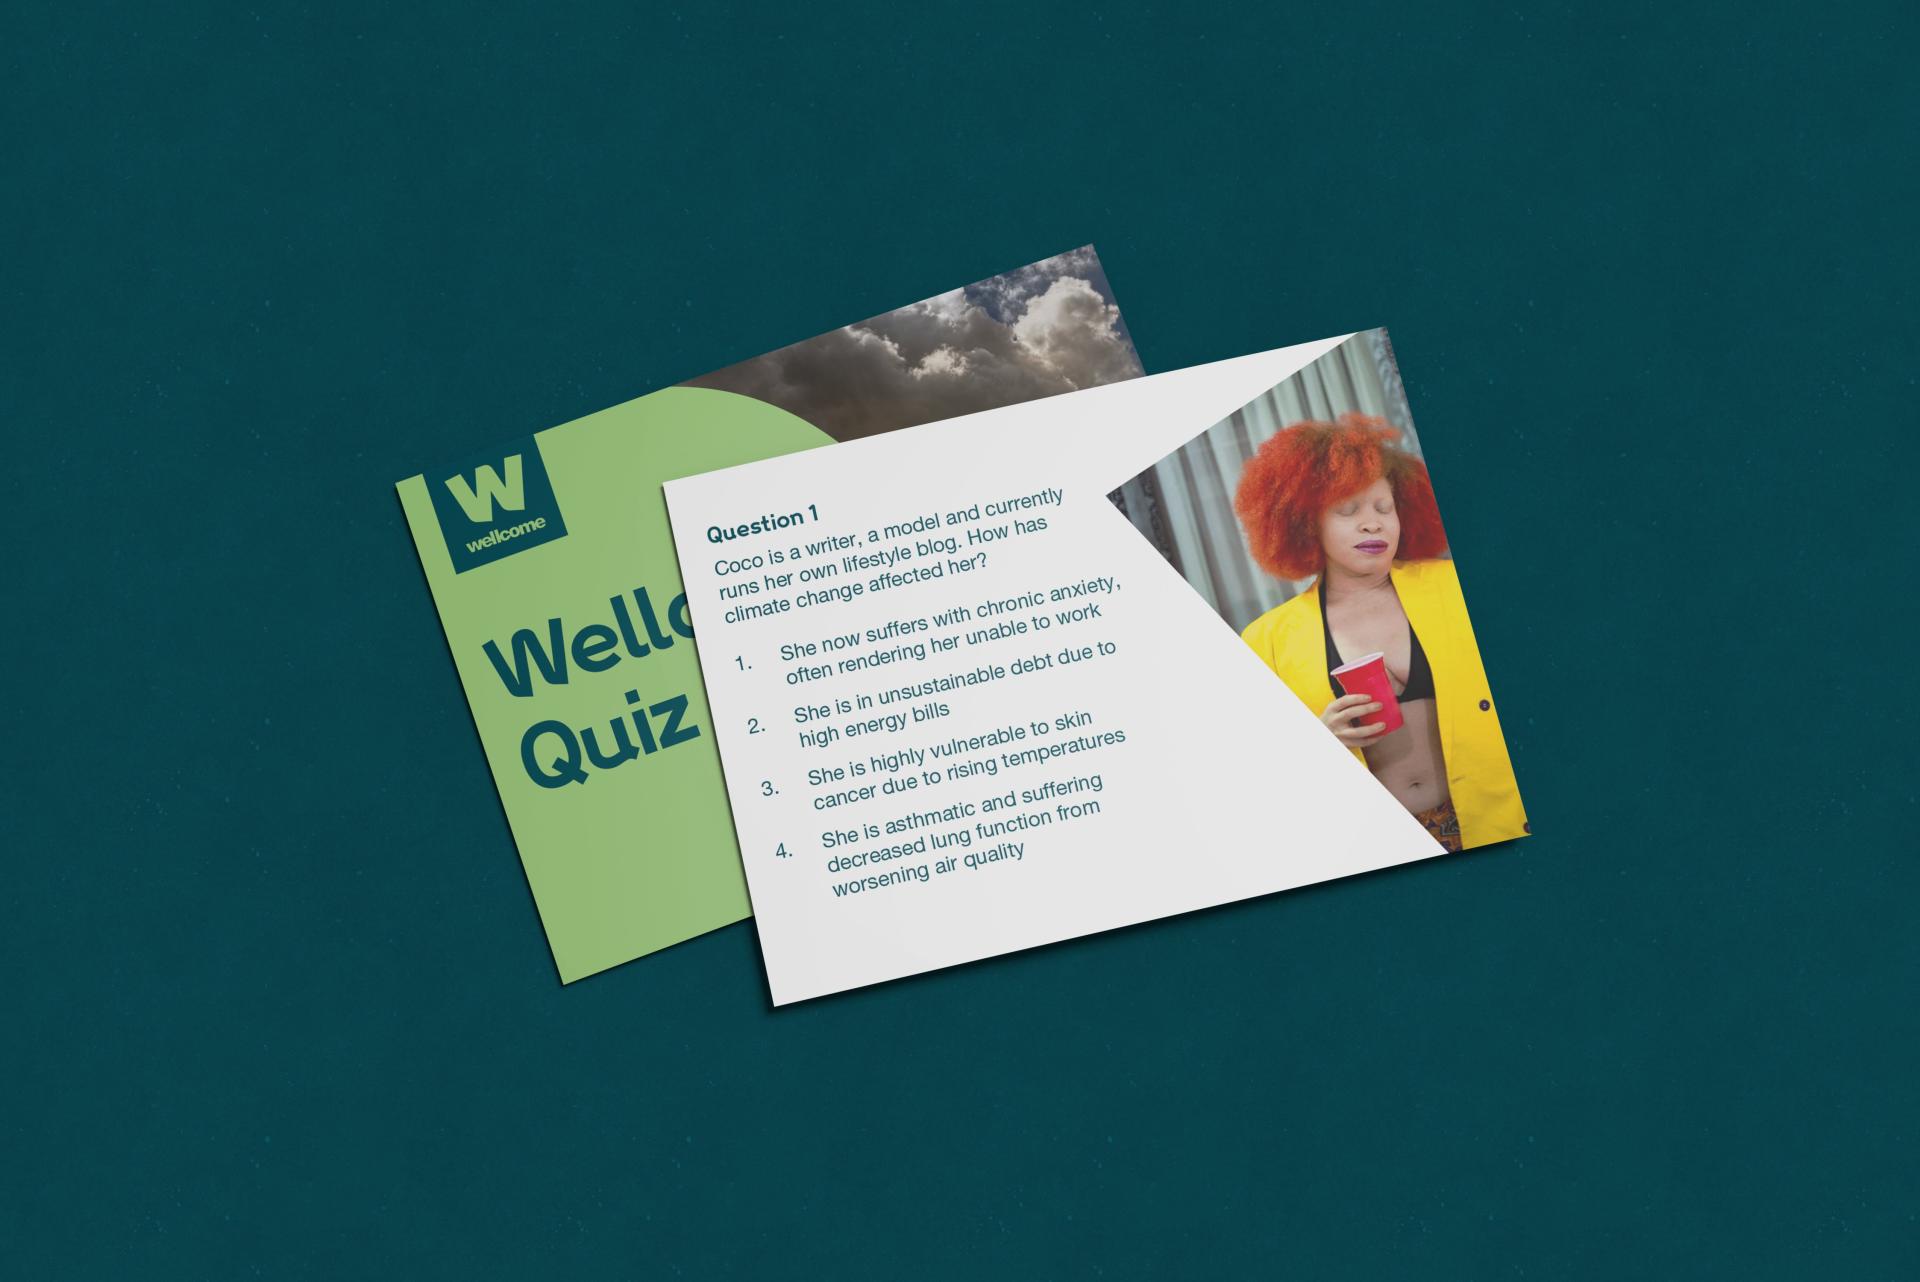 Flying Object - The Wellcome Quiz was designed to be multi-use, for example as a postcard.